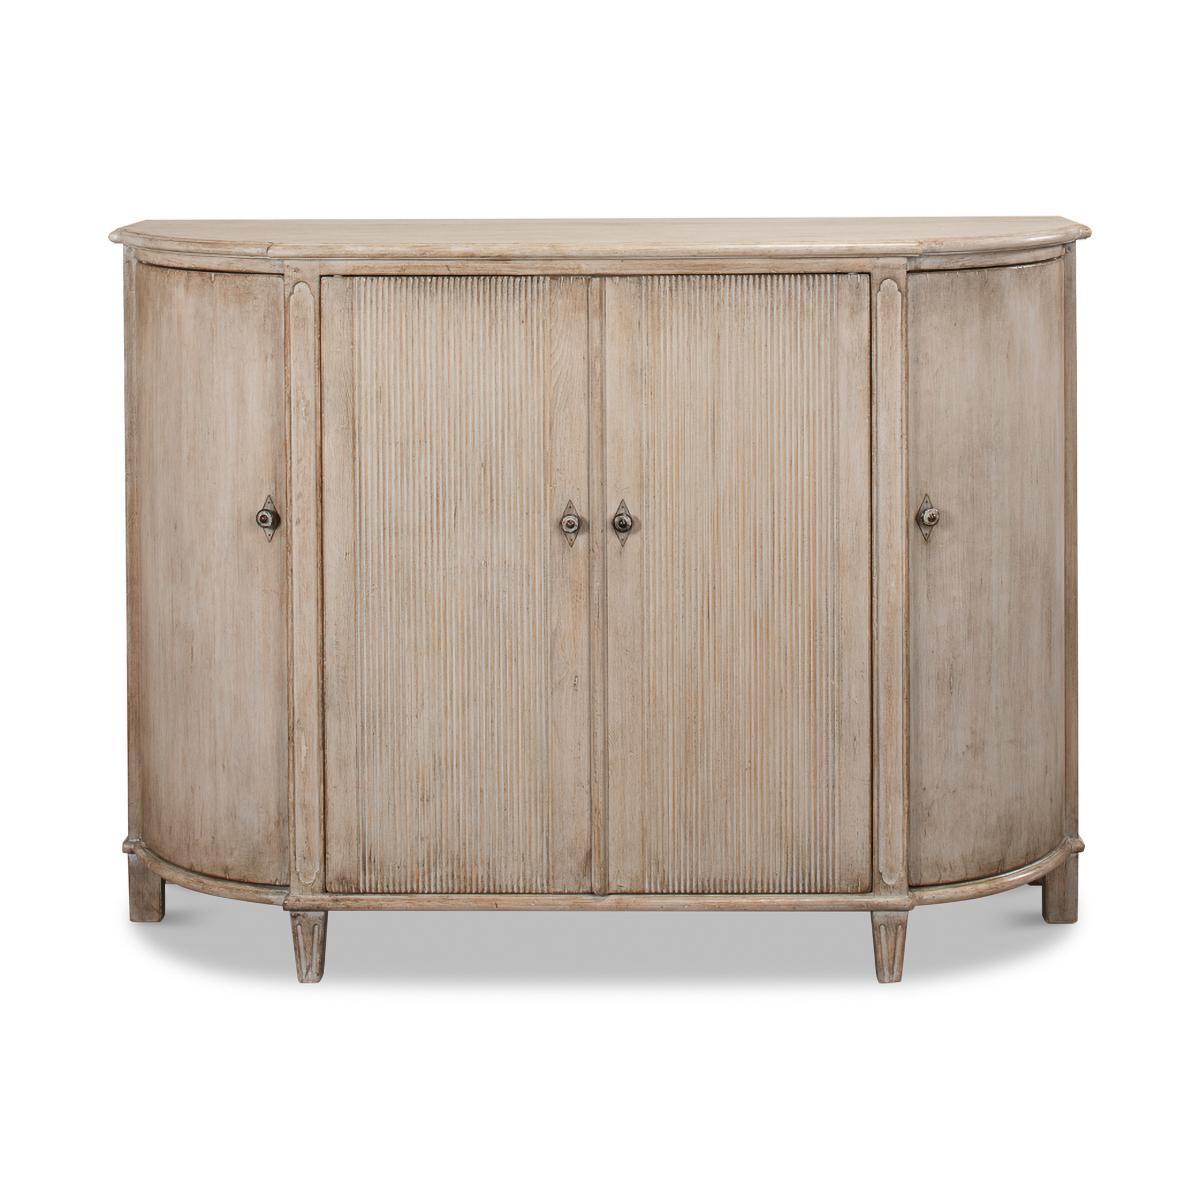 French Country Demilune Cabinet with a stone grey rustic painted finish on pine with curved doors to the sides and two reeded center doors, each section fitted with shelves. 

Dimensions: 63